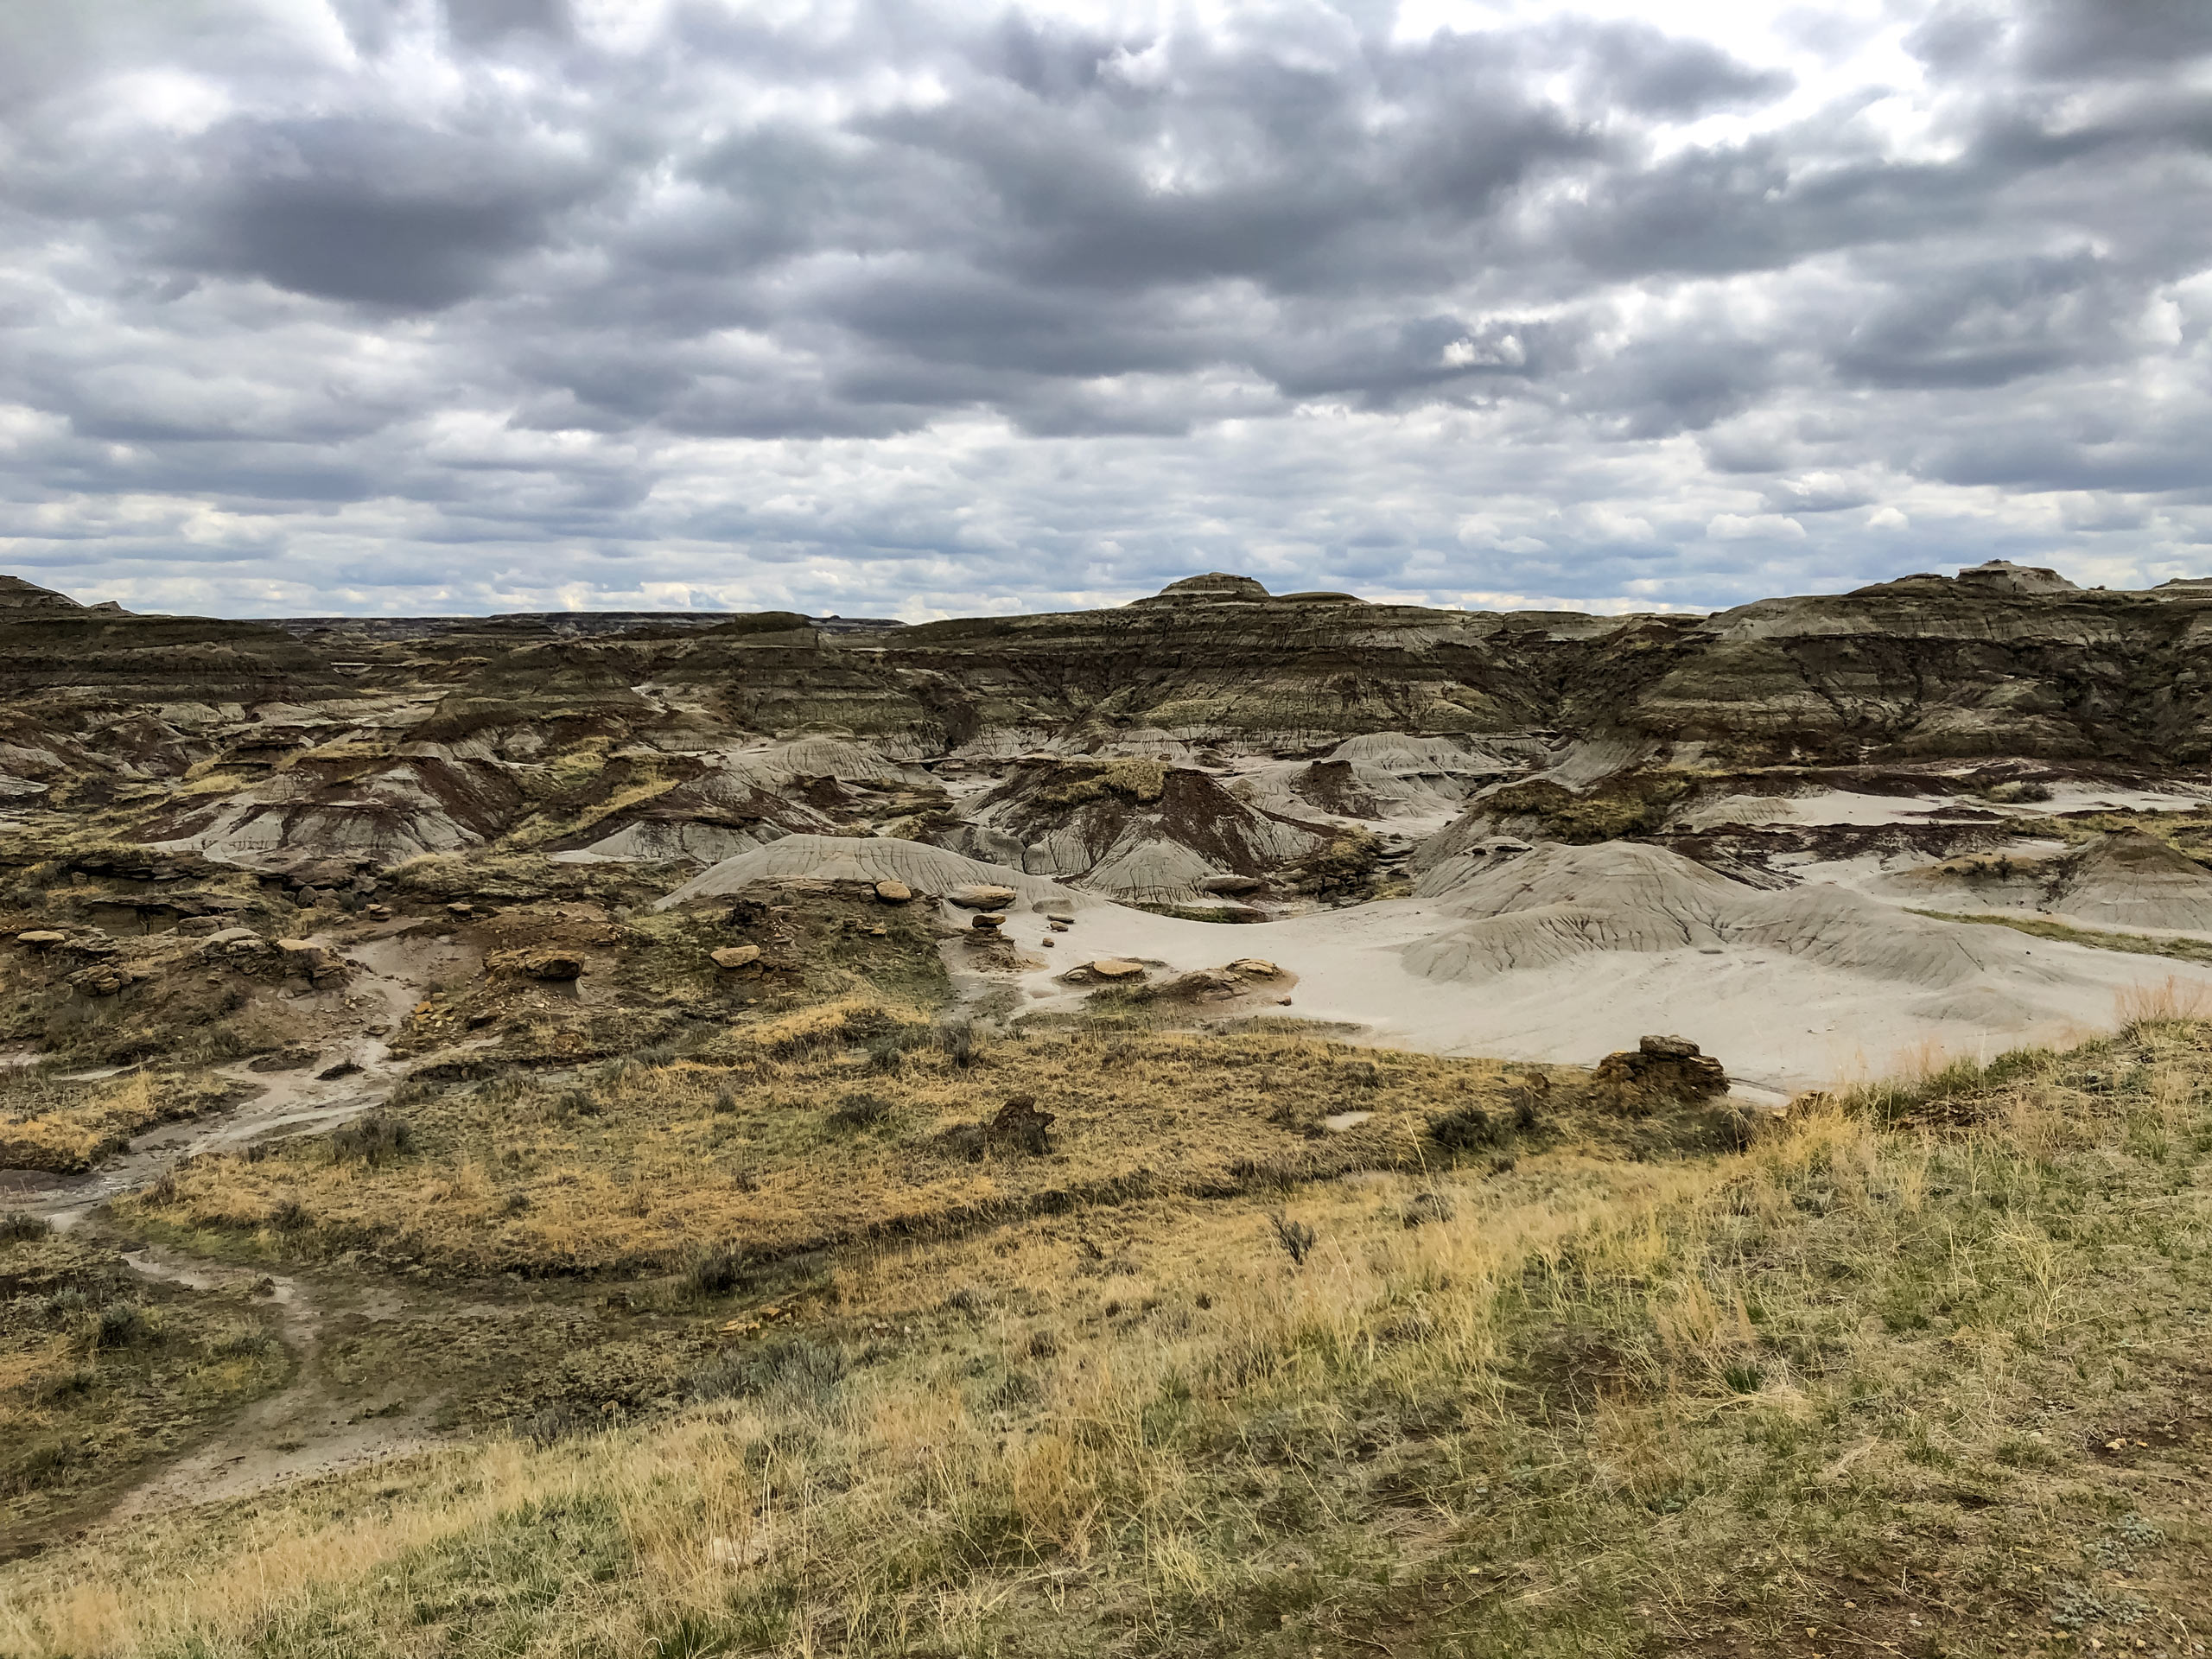 Hiking Trail of the Fossil Hunters in Dinosaur Provincial Park Alberta